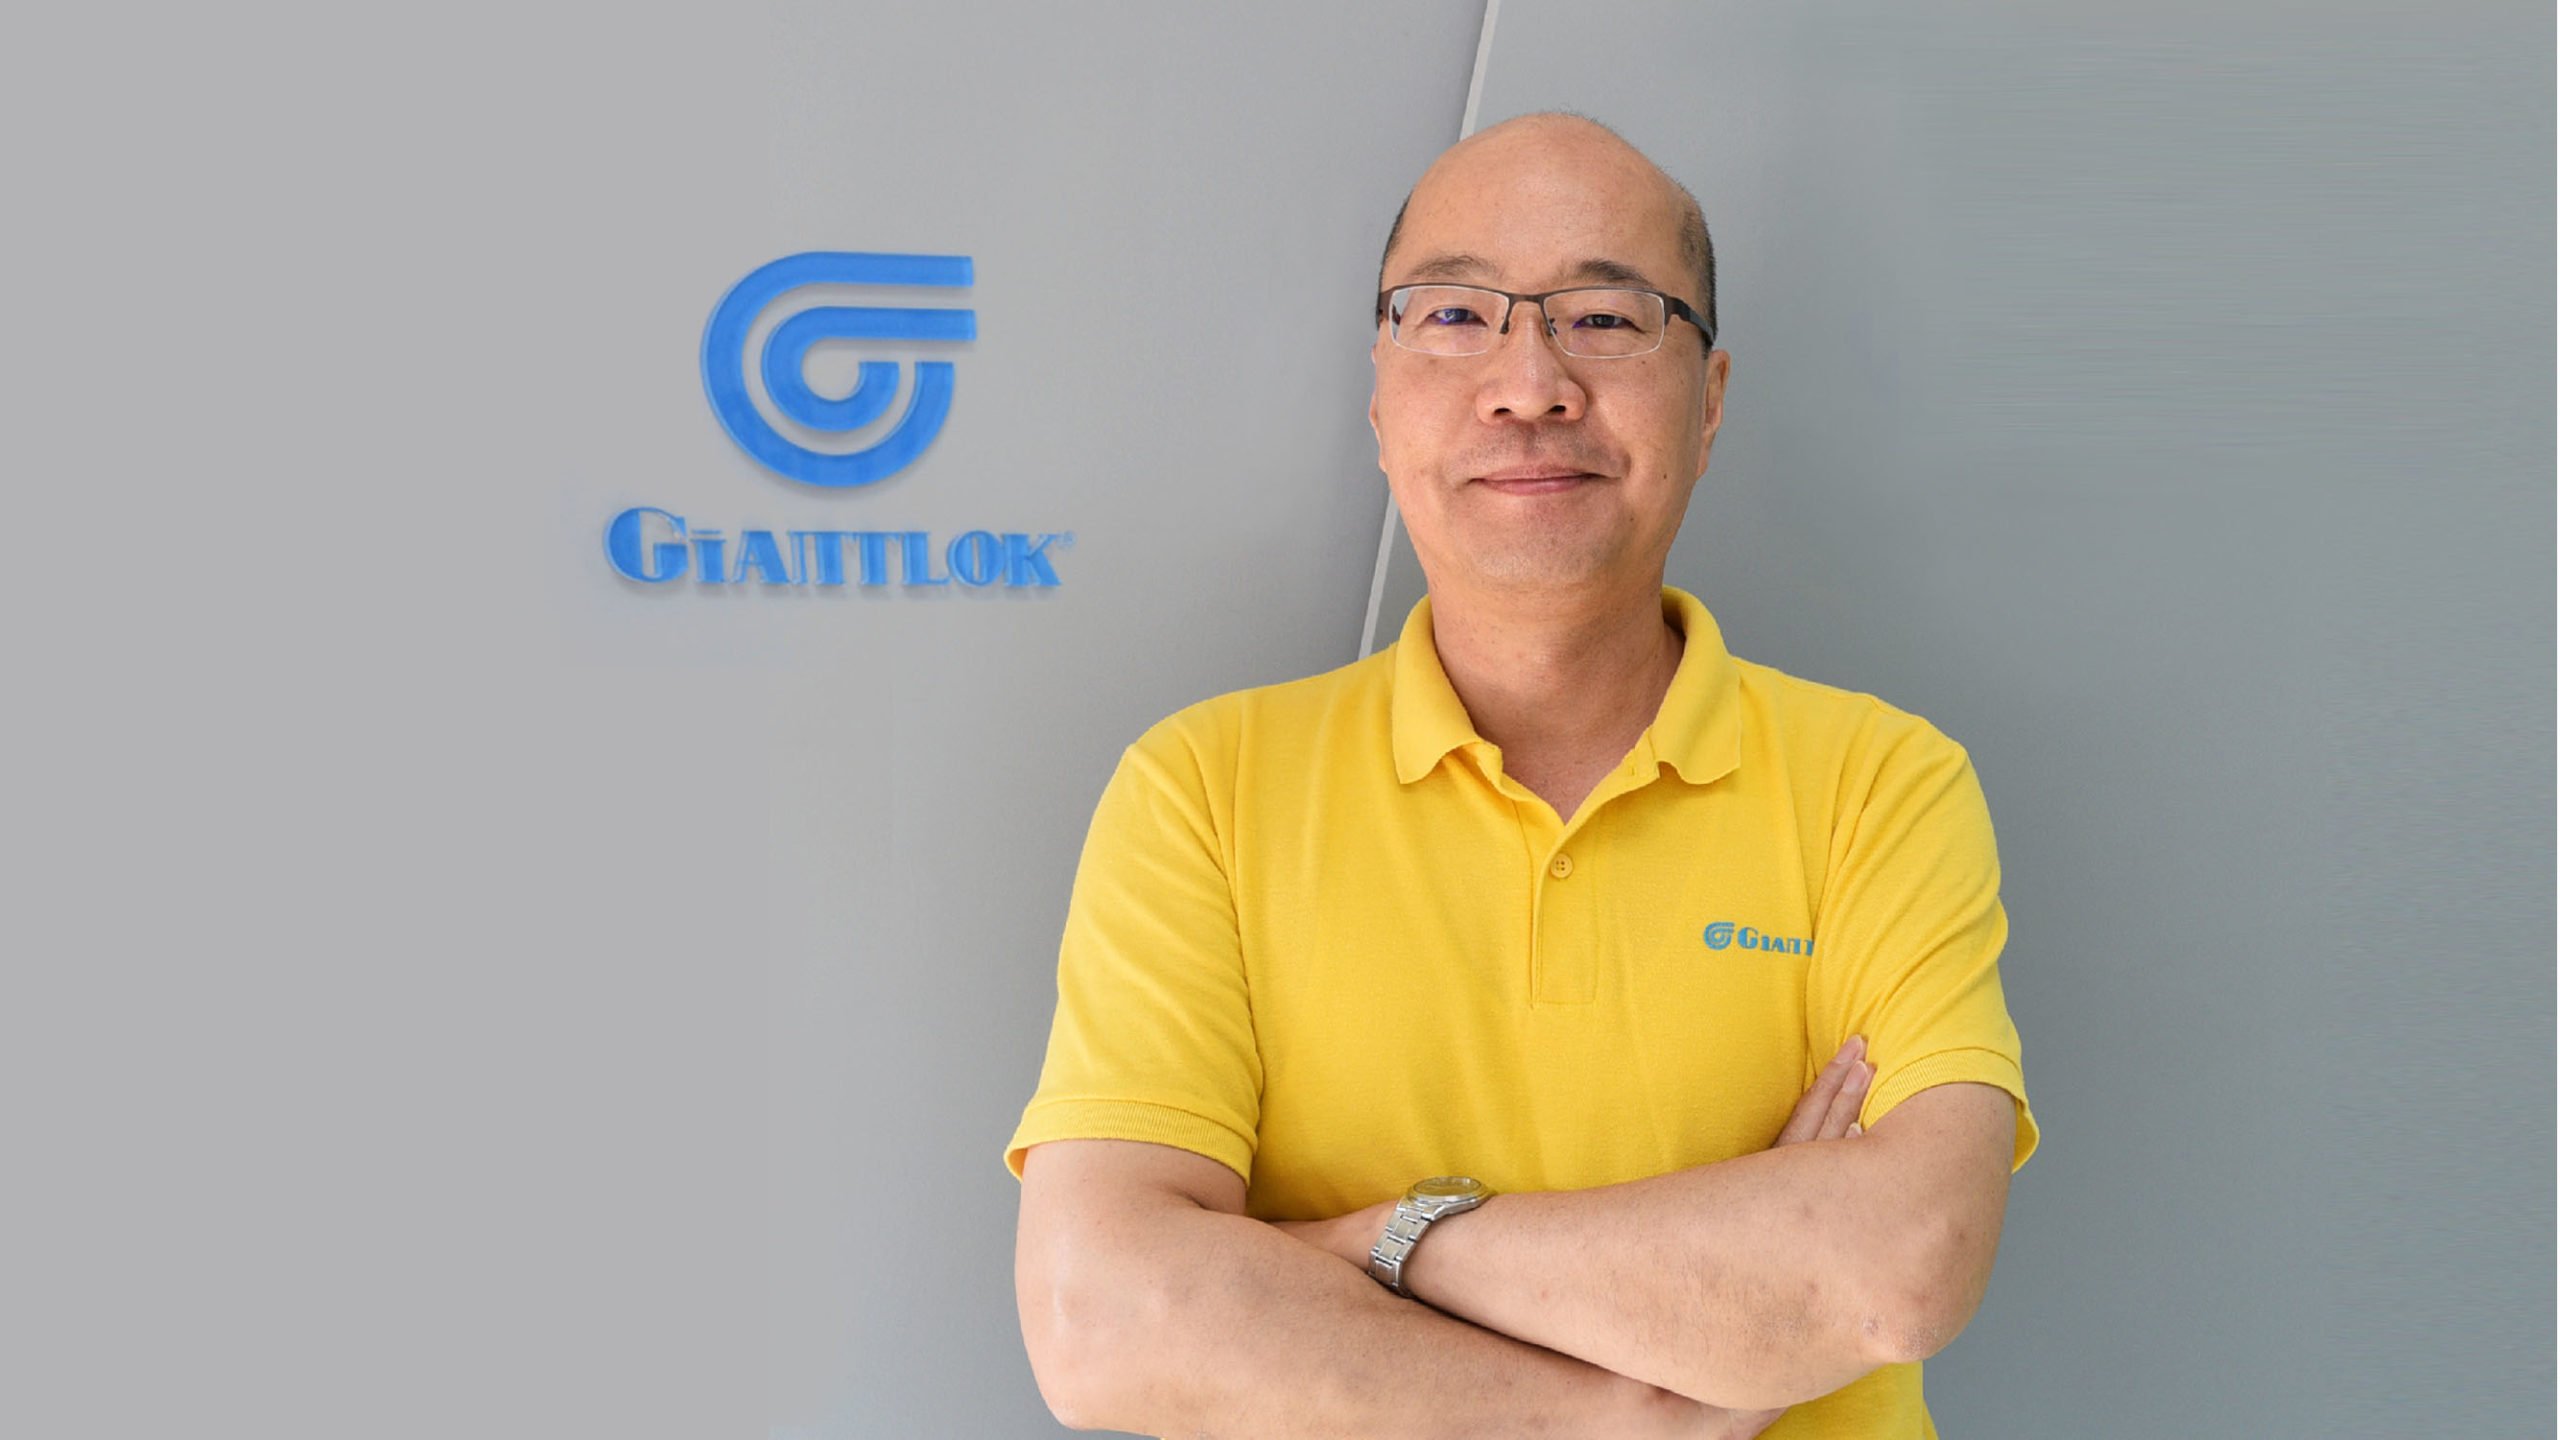 Giantlok consulting service